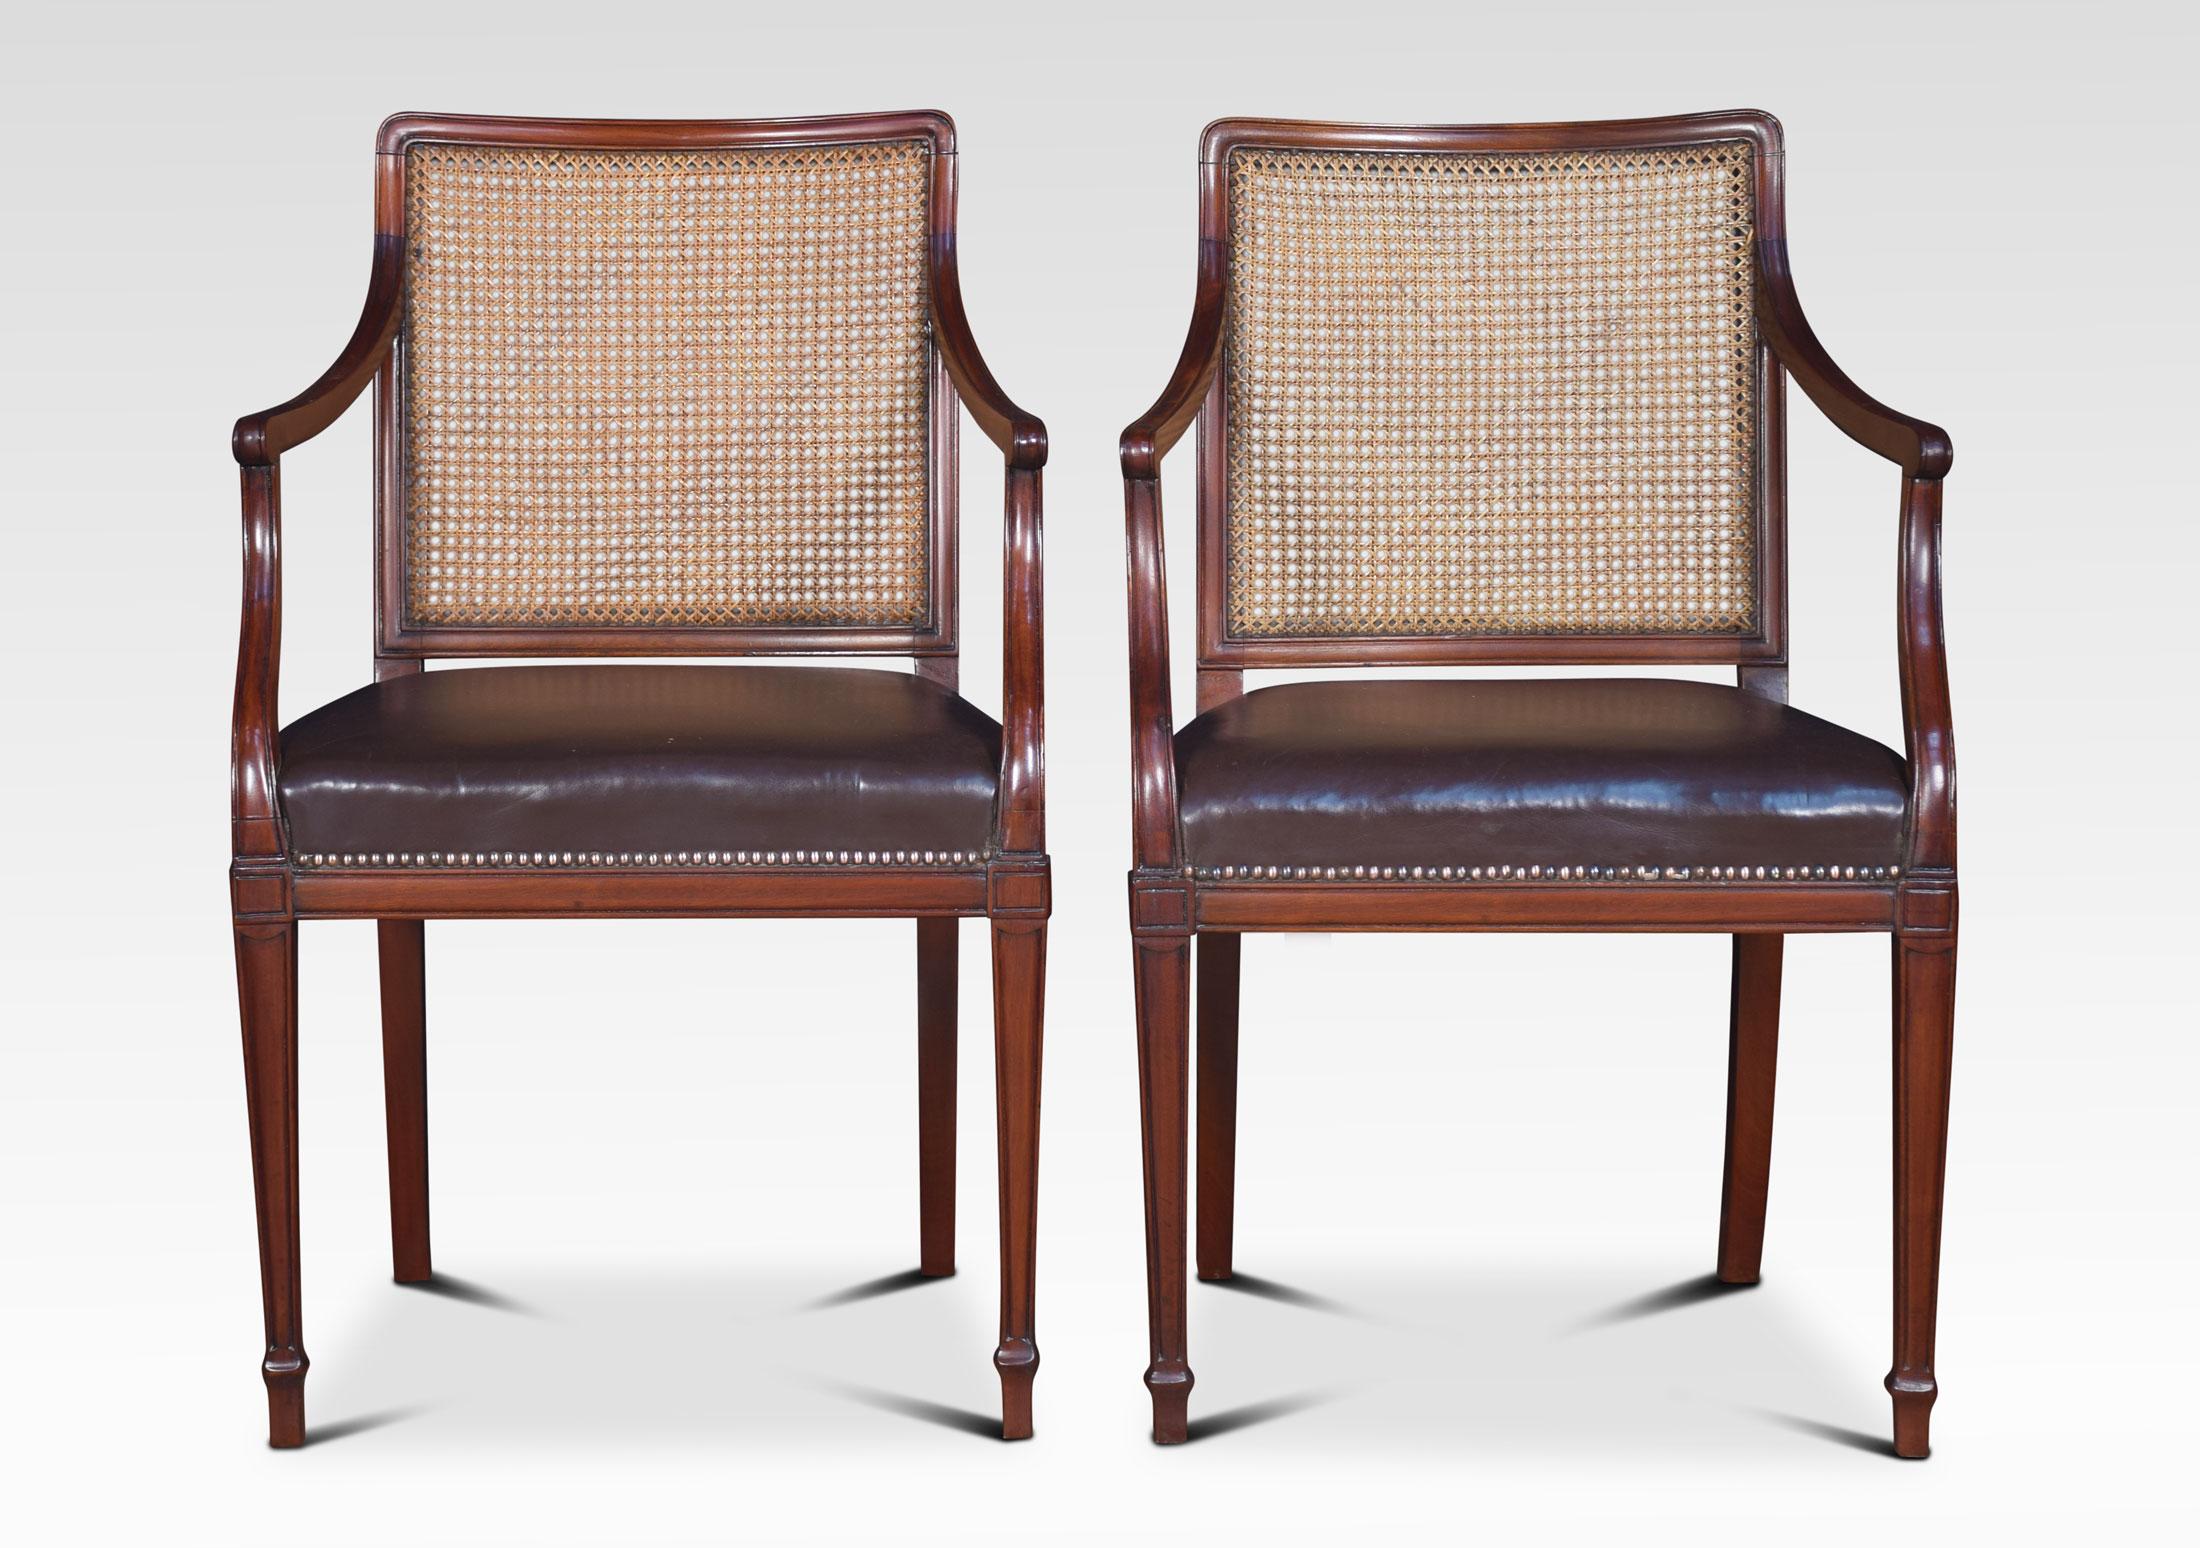 Pair mahogany Hepplewhite style office armchairs having square bergere backs above close nailed leather upholstered seats. All raised up on square tapering legs and spade feet.
Dimensions
Height 37 inches height to seat 20 inches
Width 23